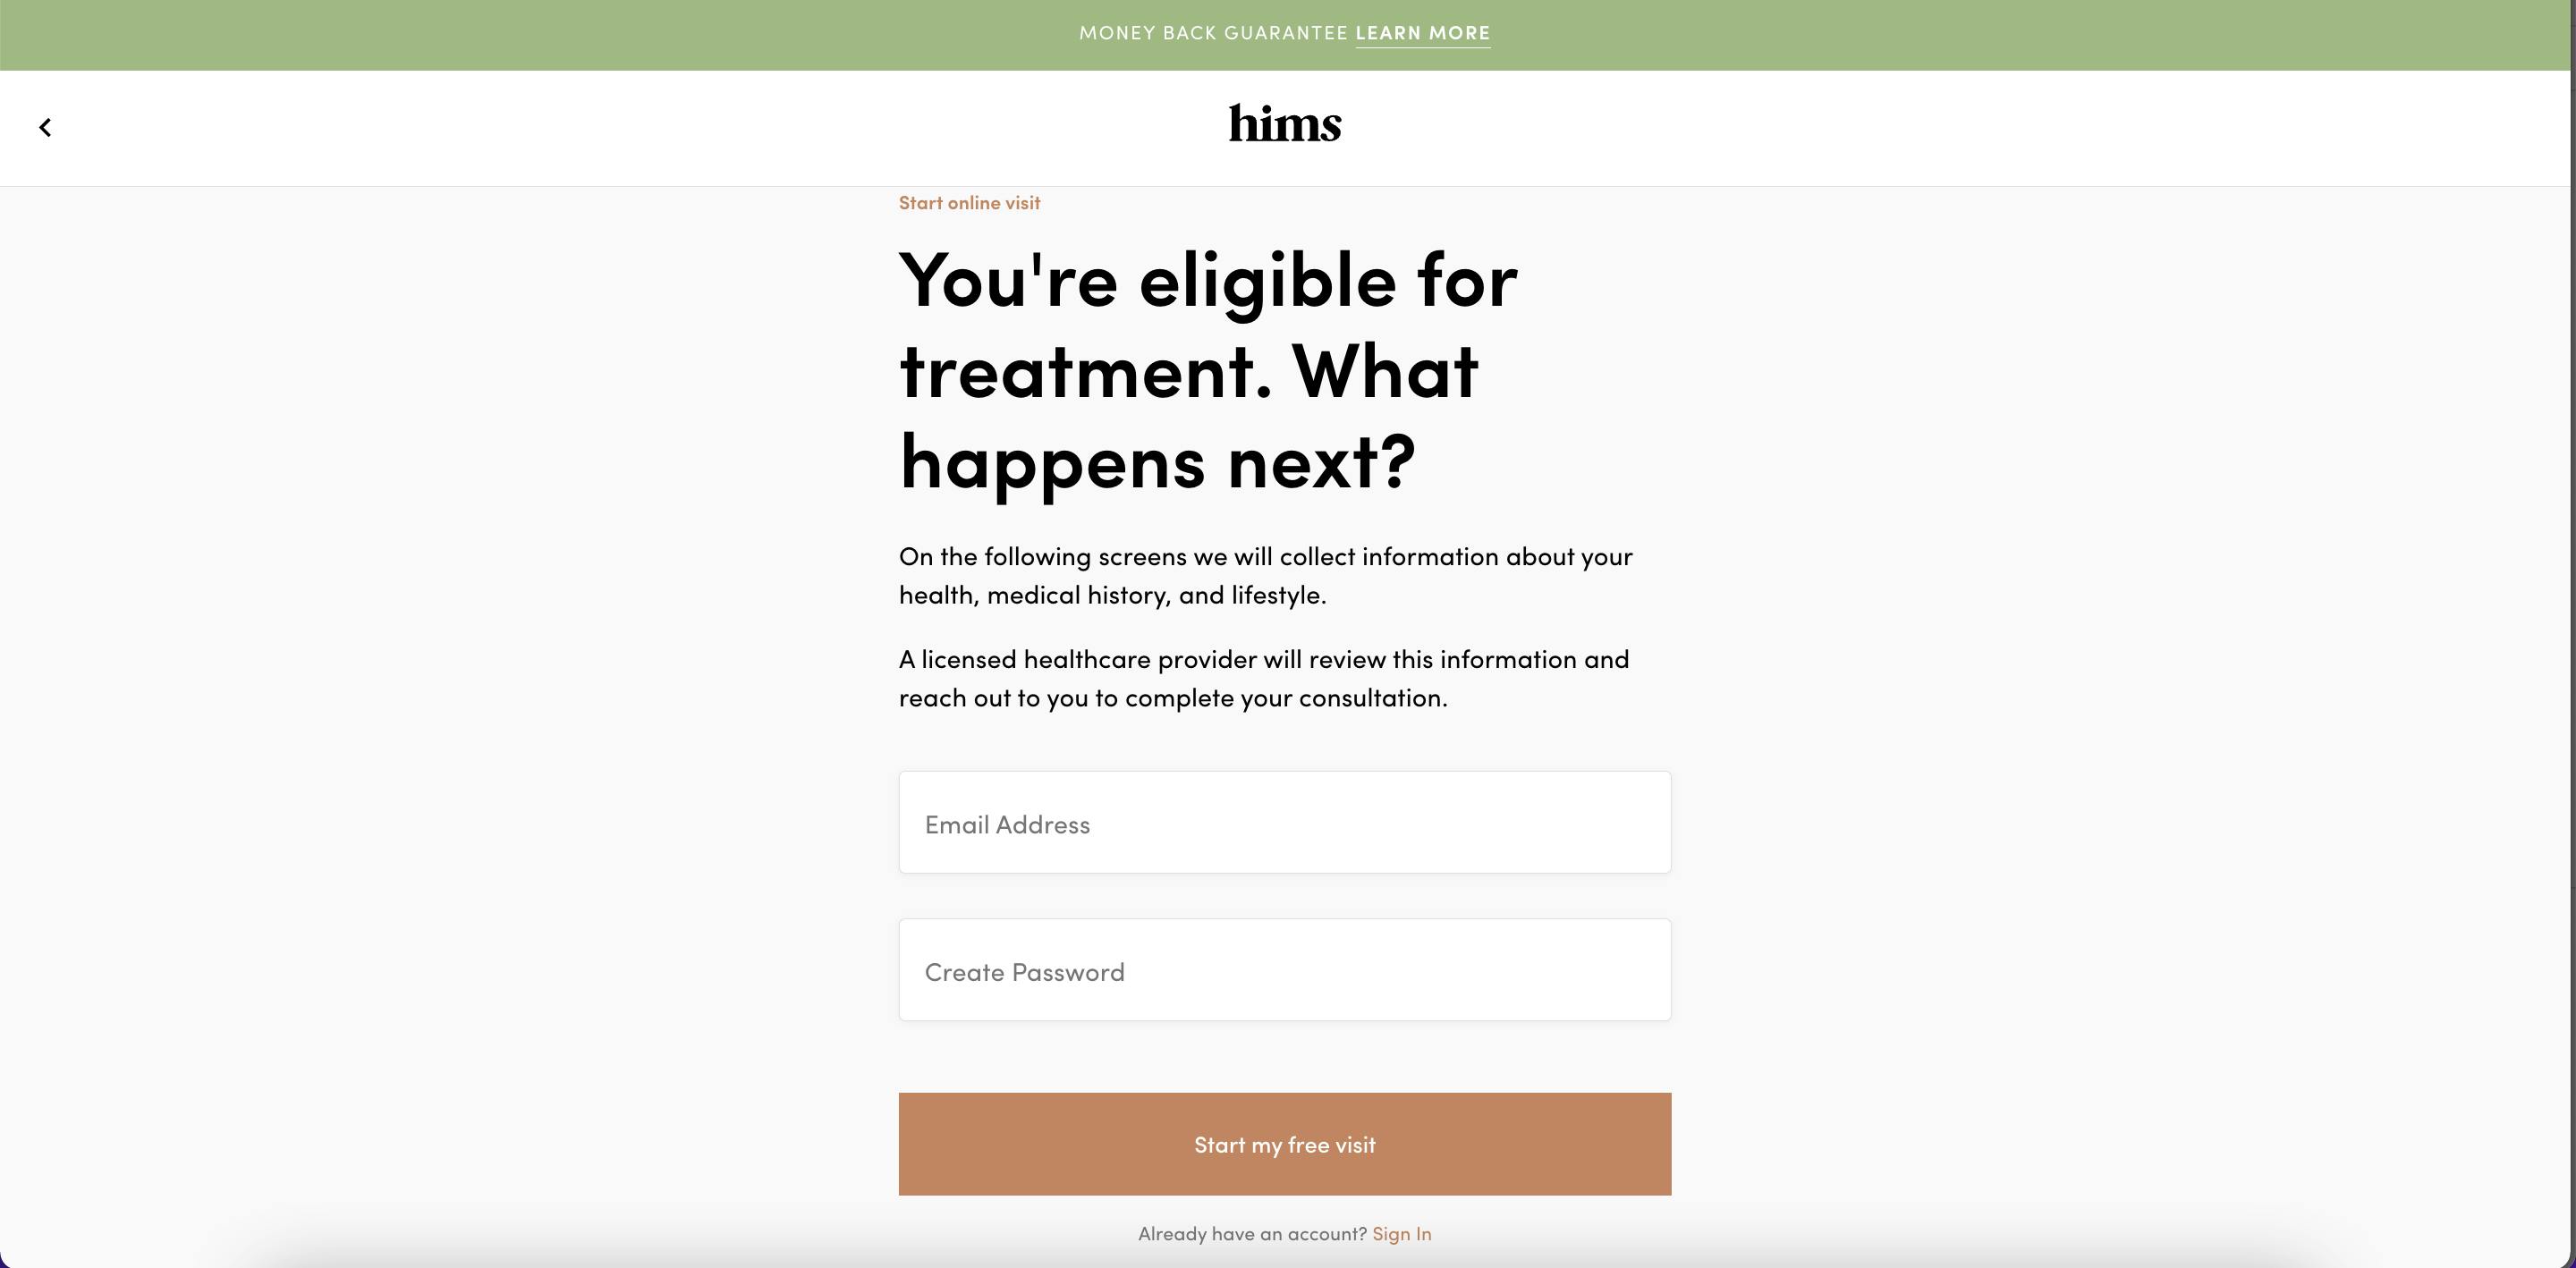 hims-eligibility-patient-intake-email